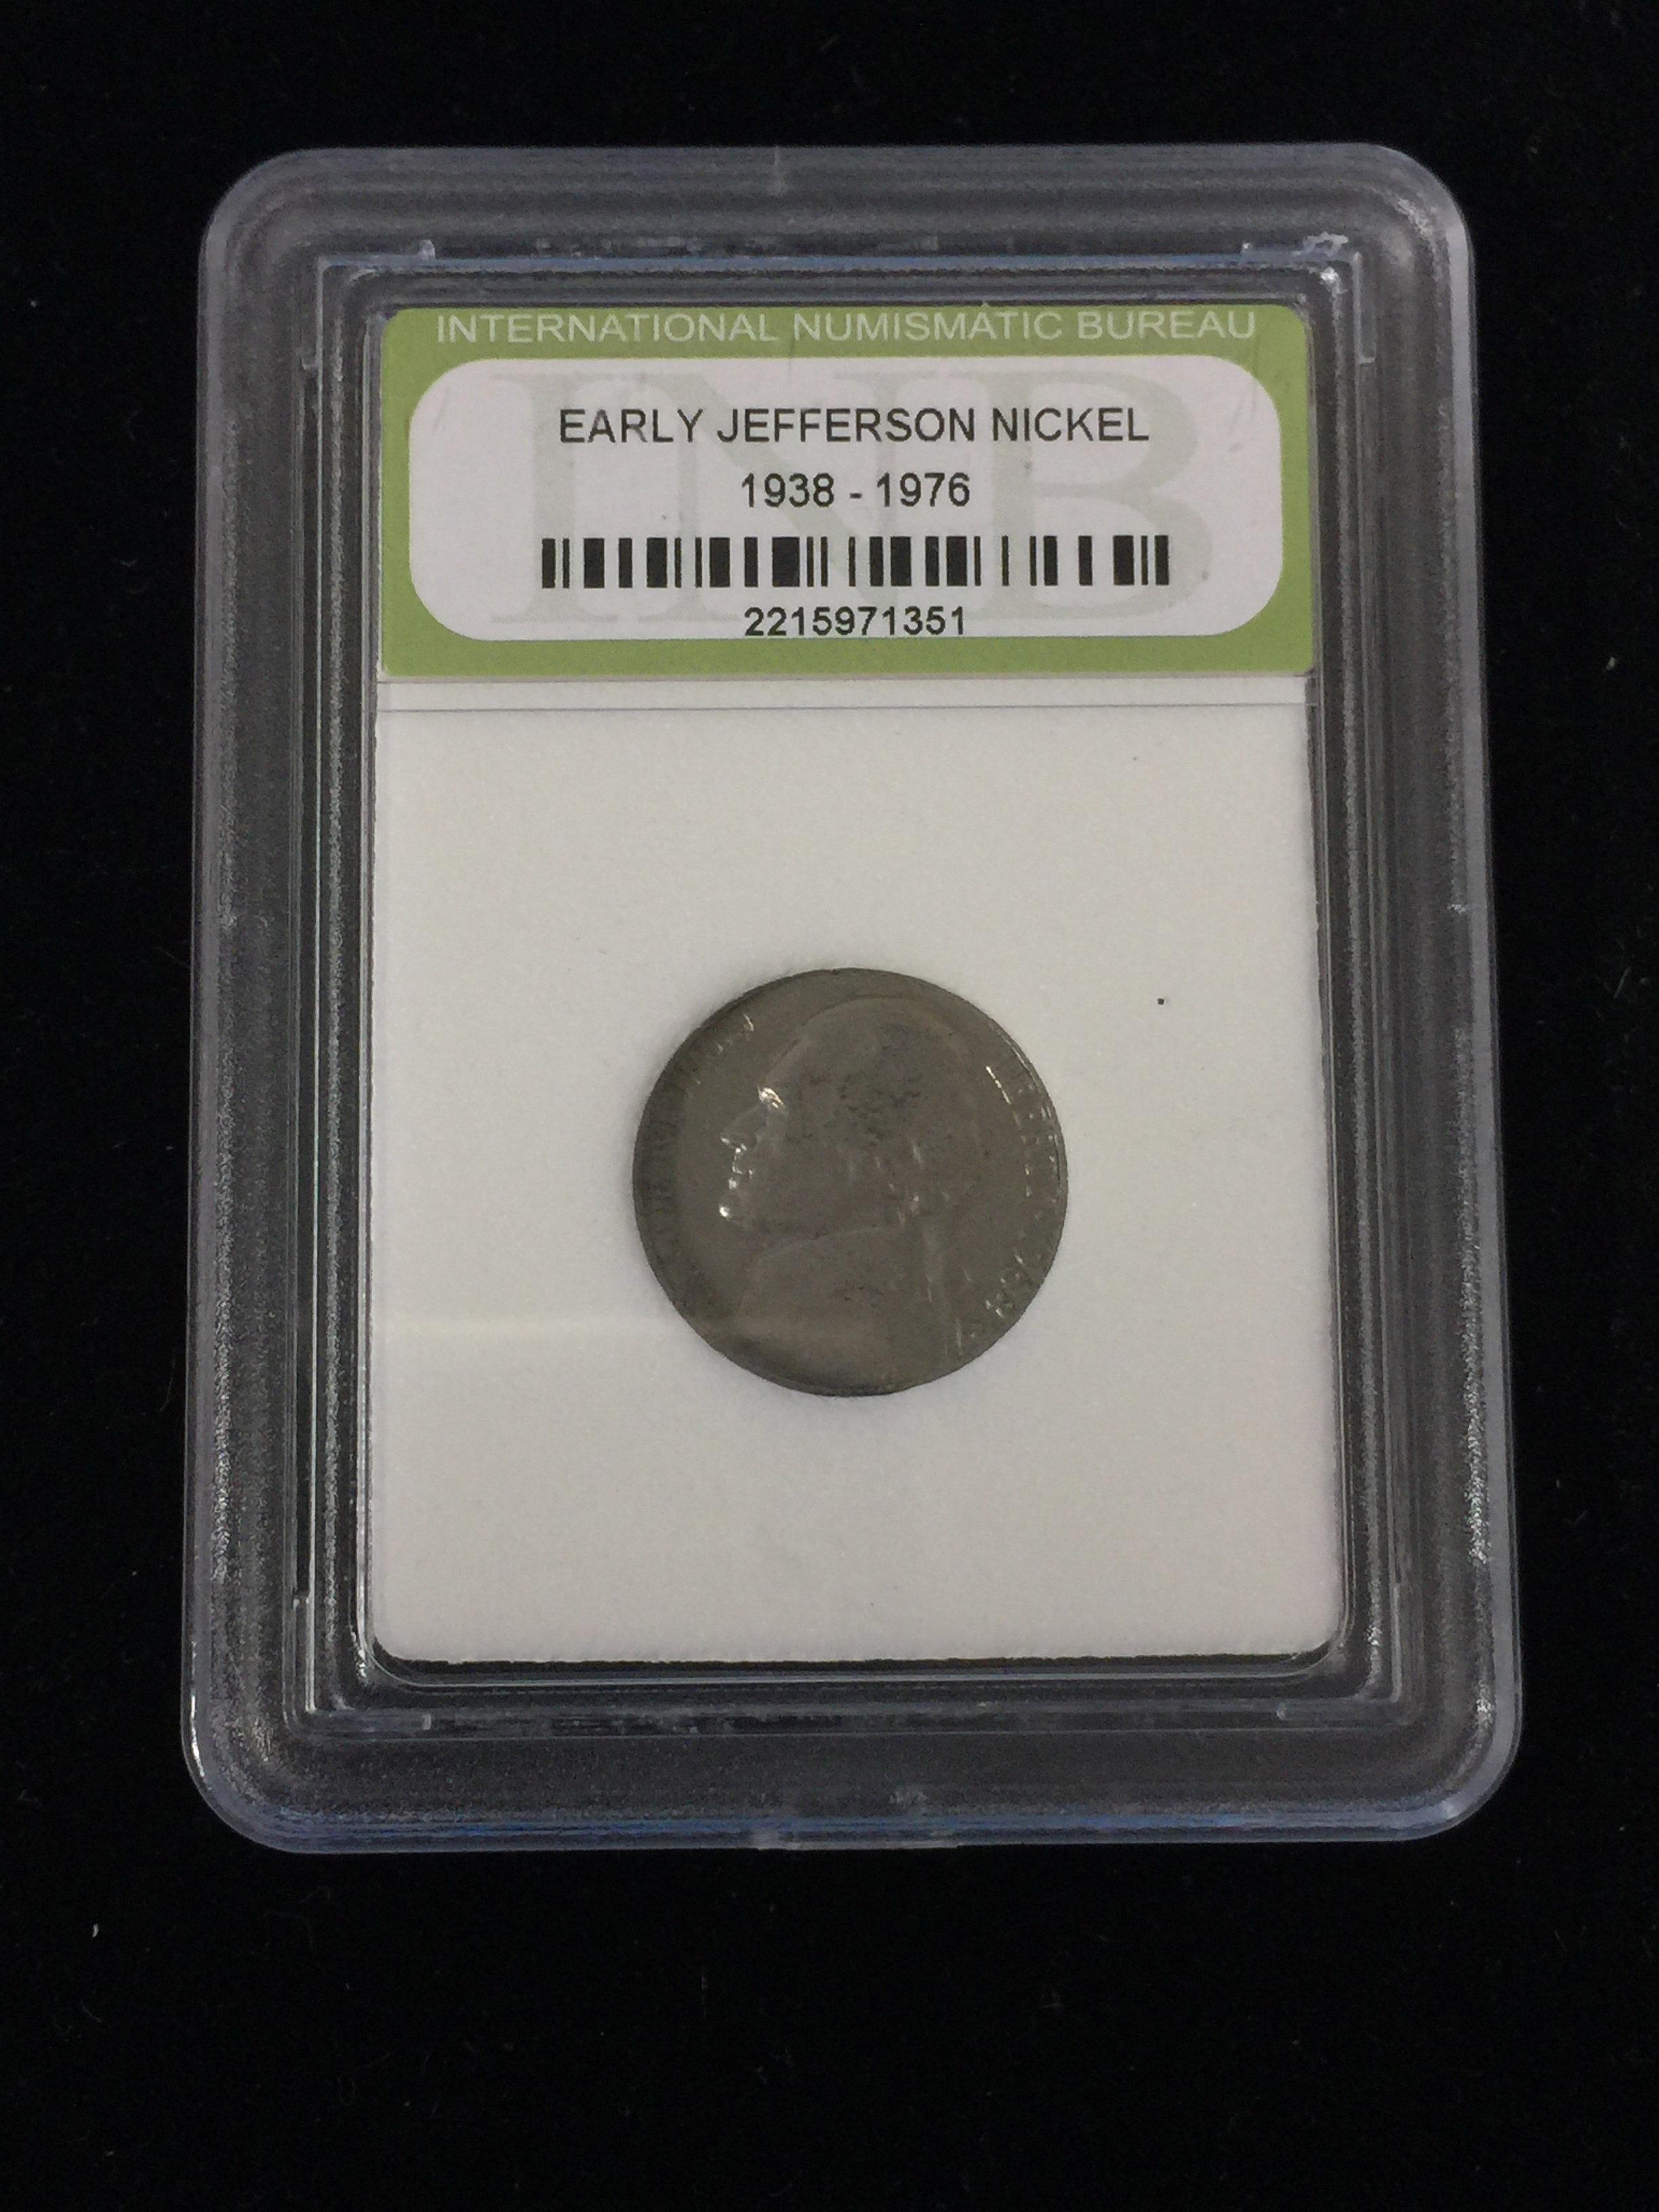 INB Slabbed 1968 United States Early Jefferson Nickel Coin